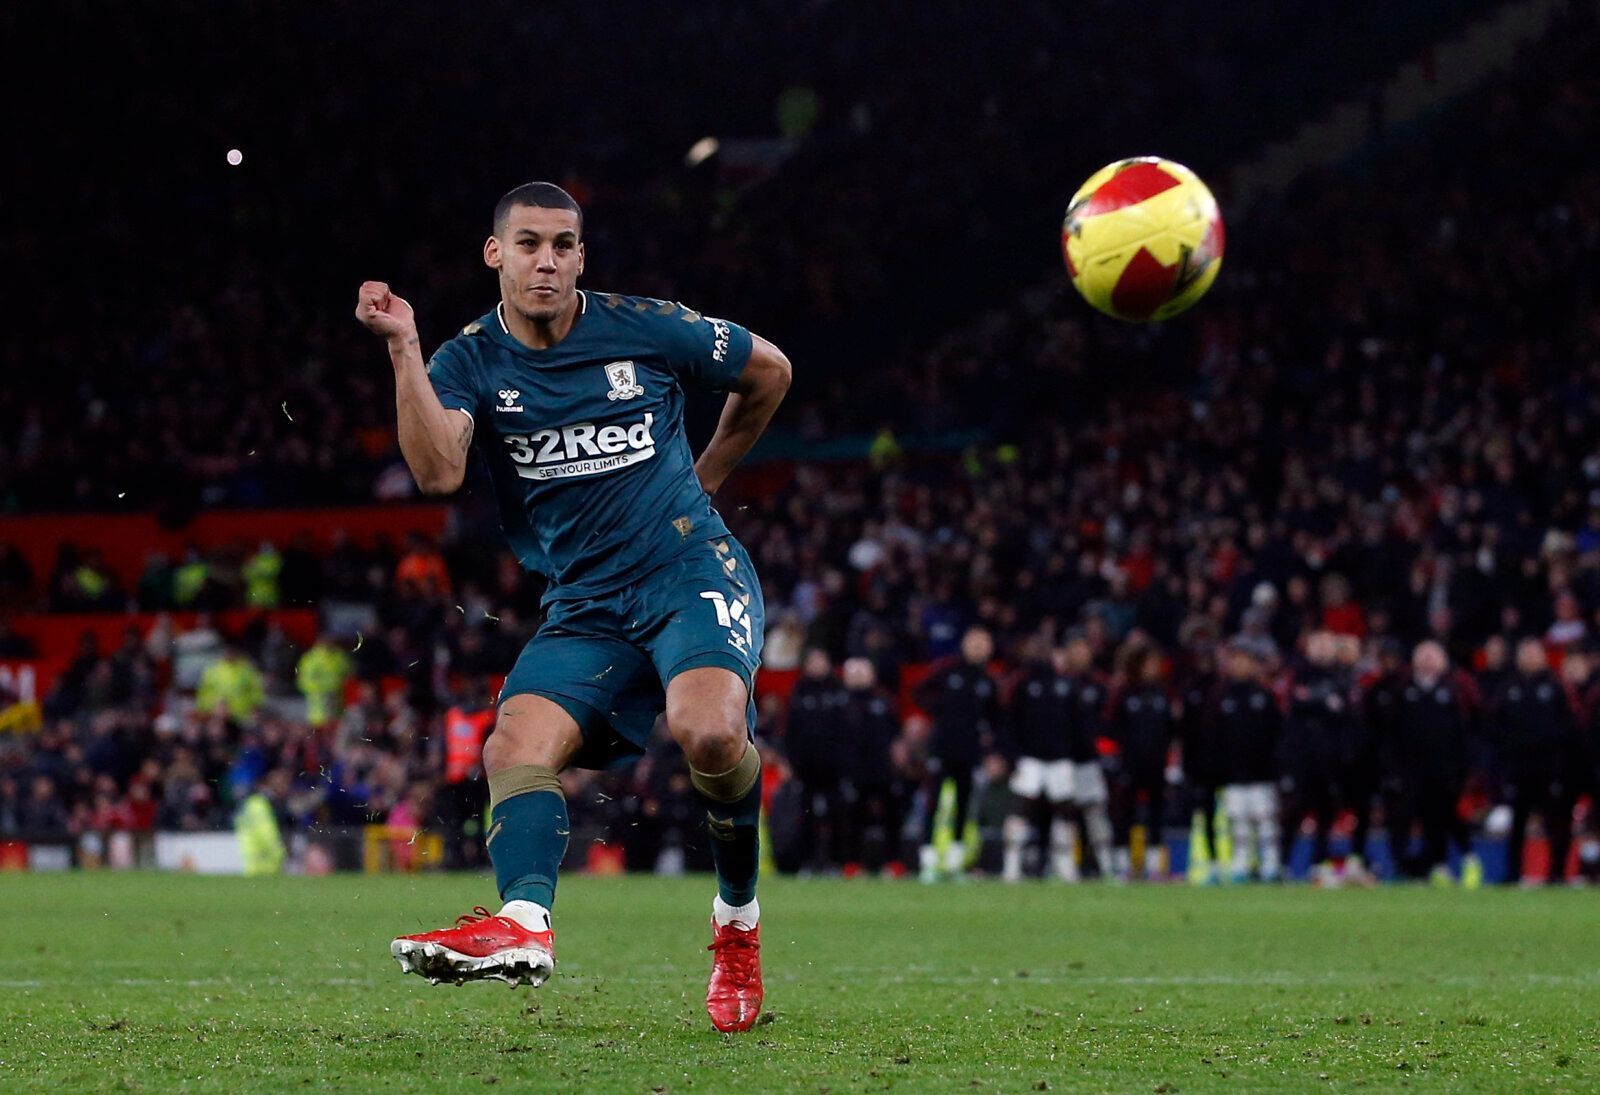 Soccer Football - FA Cup Fourth Round - Manchester United v Middlesbrough - Old Trafford, Manchester, Britain - February 4, 2022 Middlesbrough's Lee Peltier scores a penalty during the shoot-out REUTERS/Craig Brough